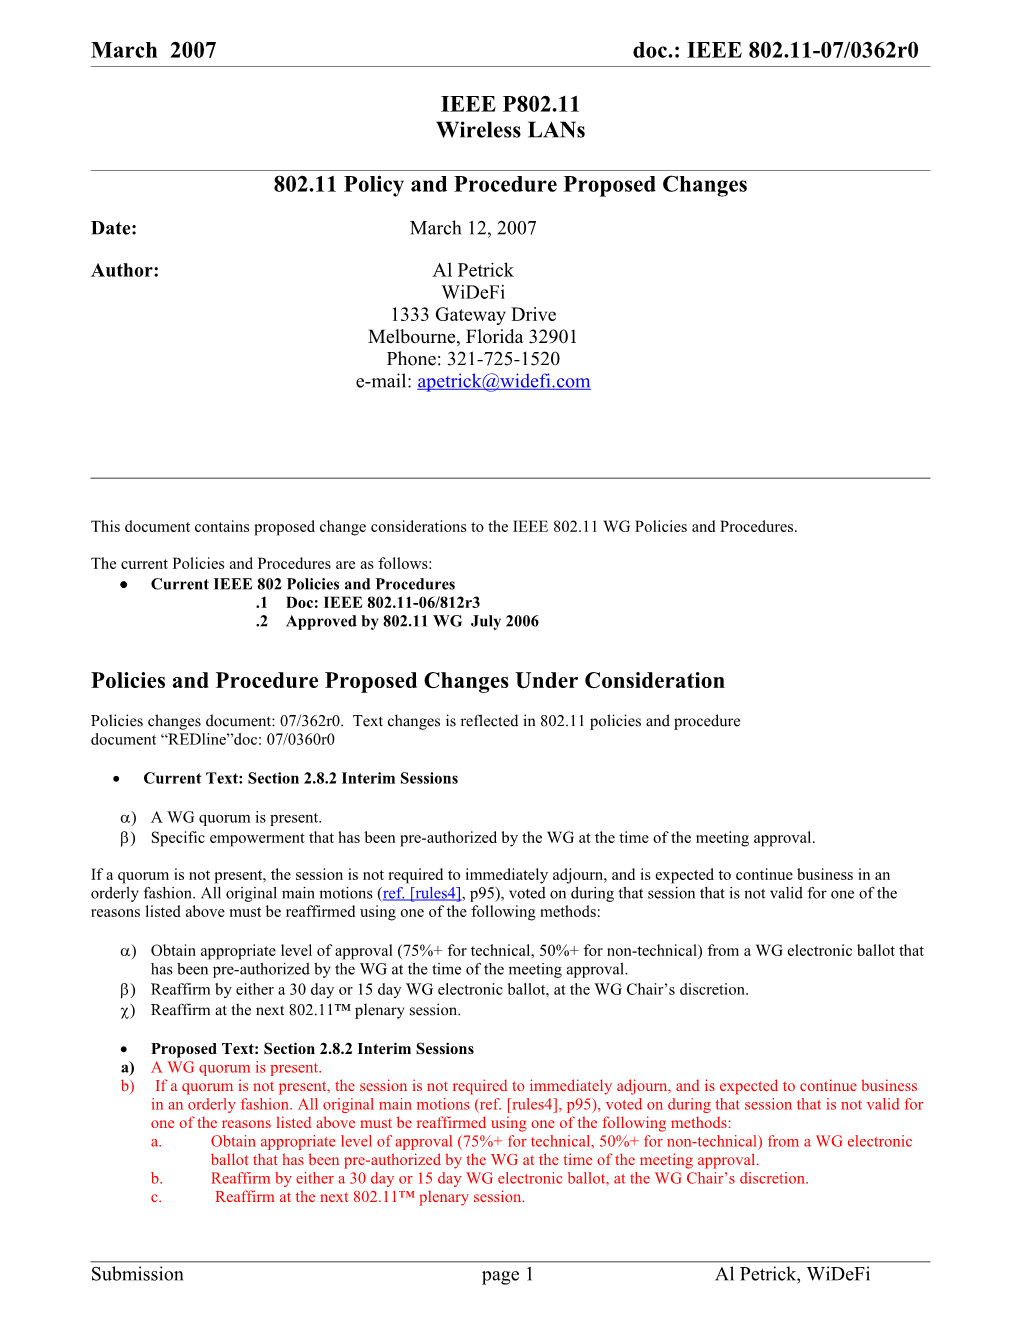 802.11 Policy and Procedure Proposed Changes